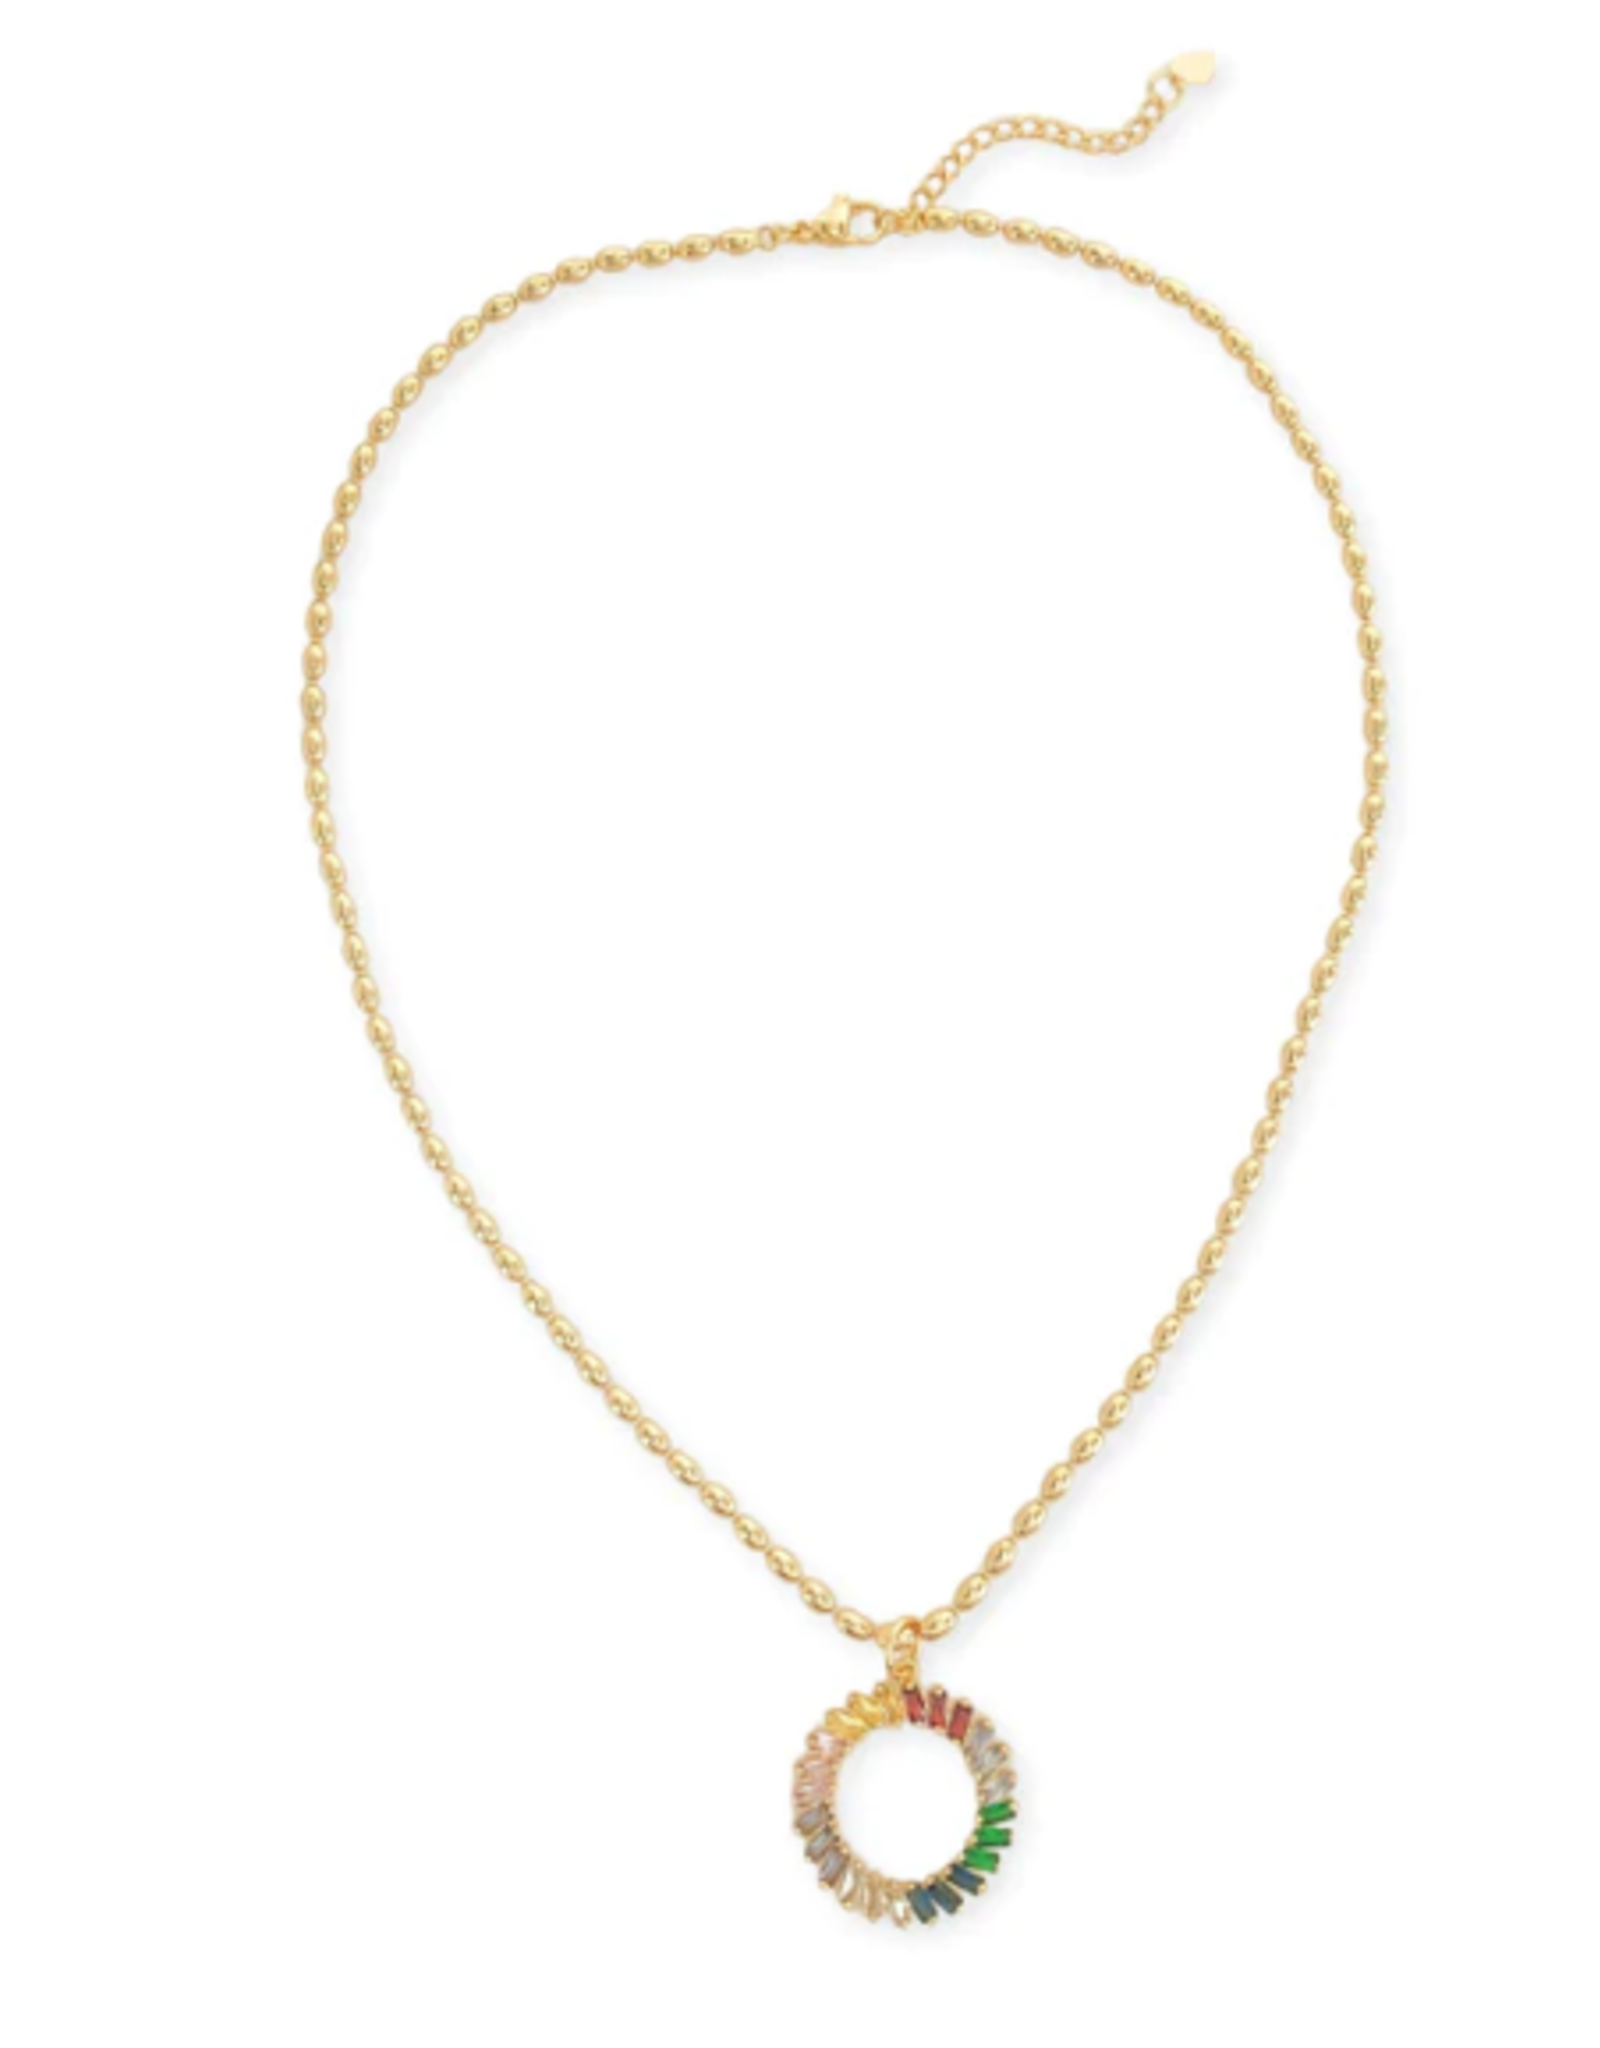 Gold Beaded Chain W/Circle Pendant Necklace